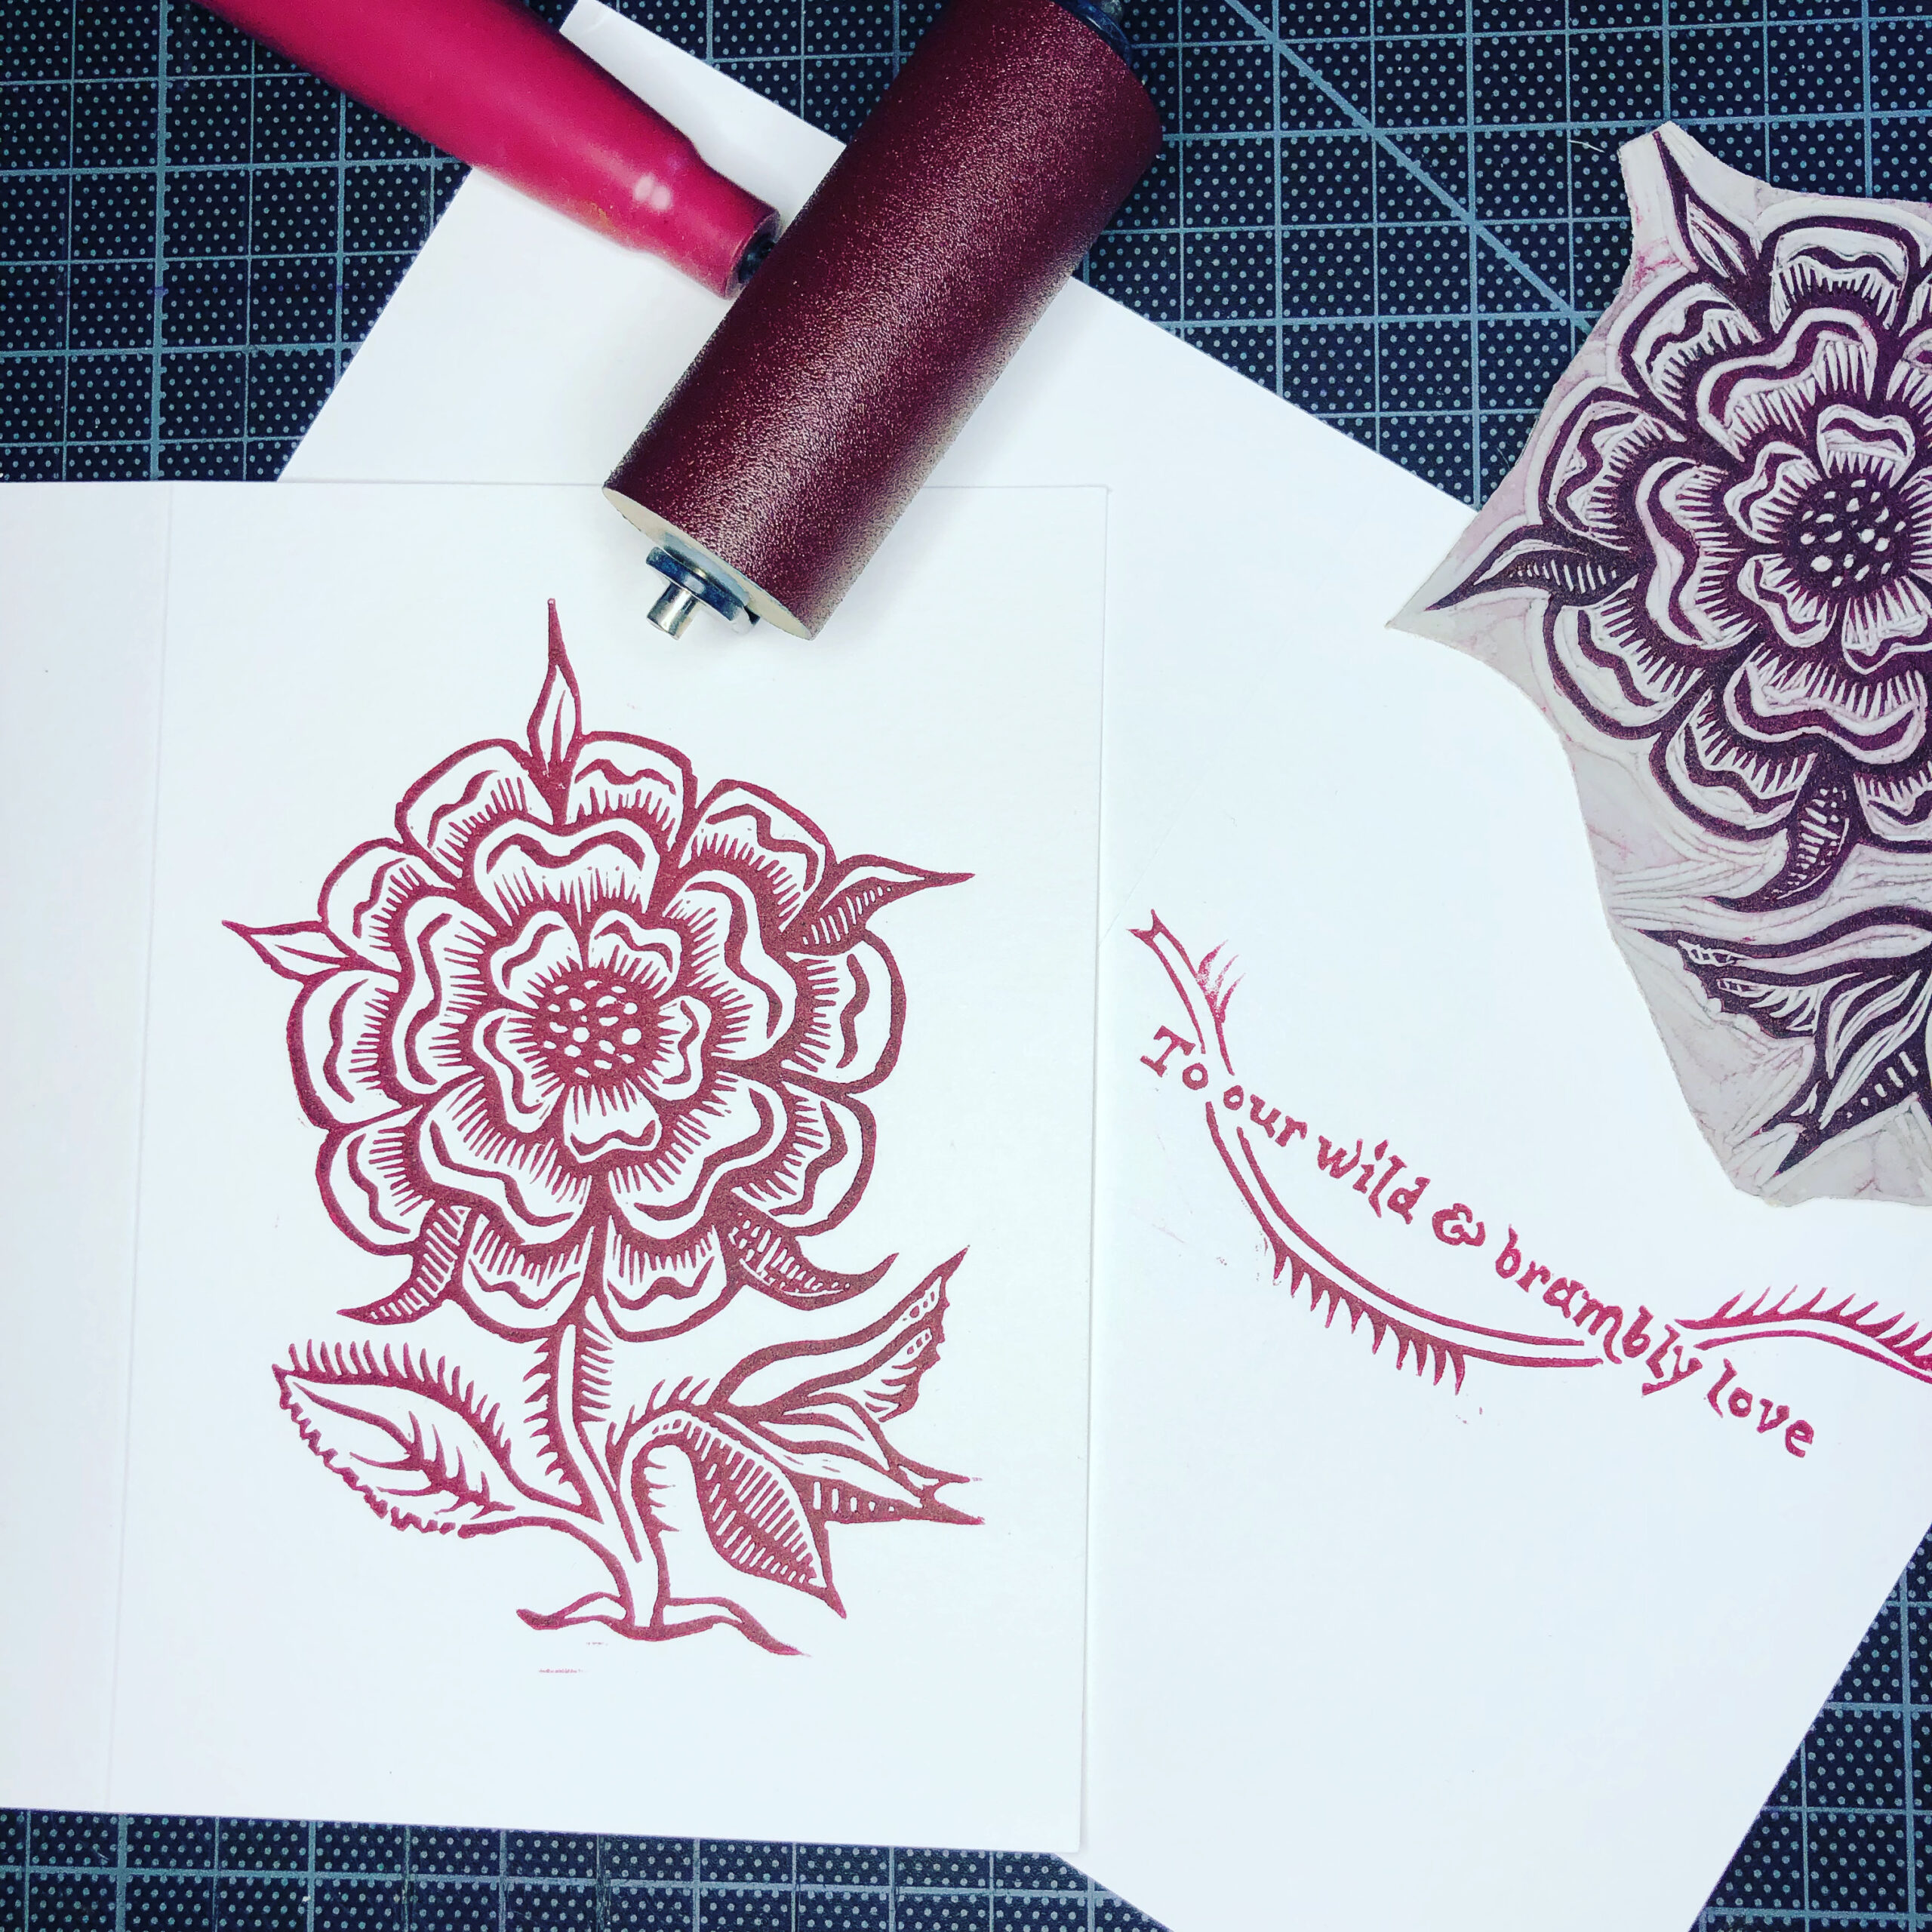 Handprinted linocut greeting card in red-violent ink on white paper, featuring a wild rose from a 16th-century book. A second card to the right shows hand-carved lettering and thorny stem inside reading: To our wild & brambly love. The linocut block and an inked roller are lying alongside the cards on a black gridded cutting mat.